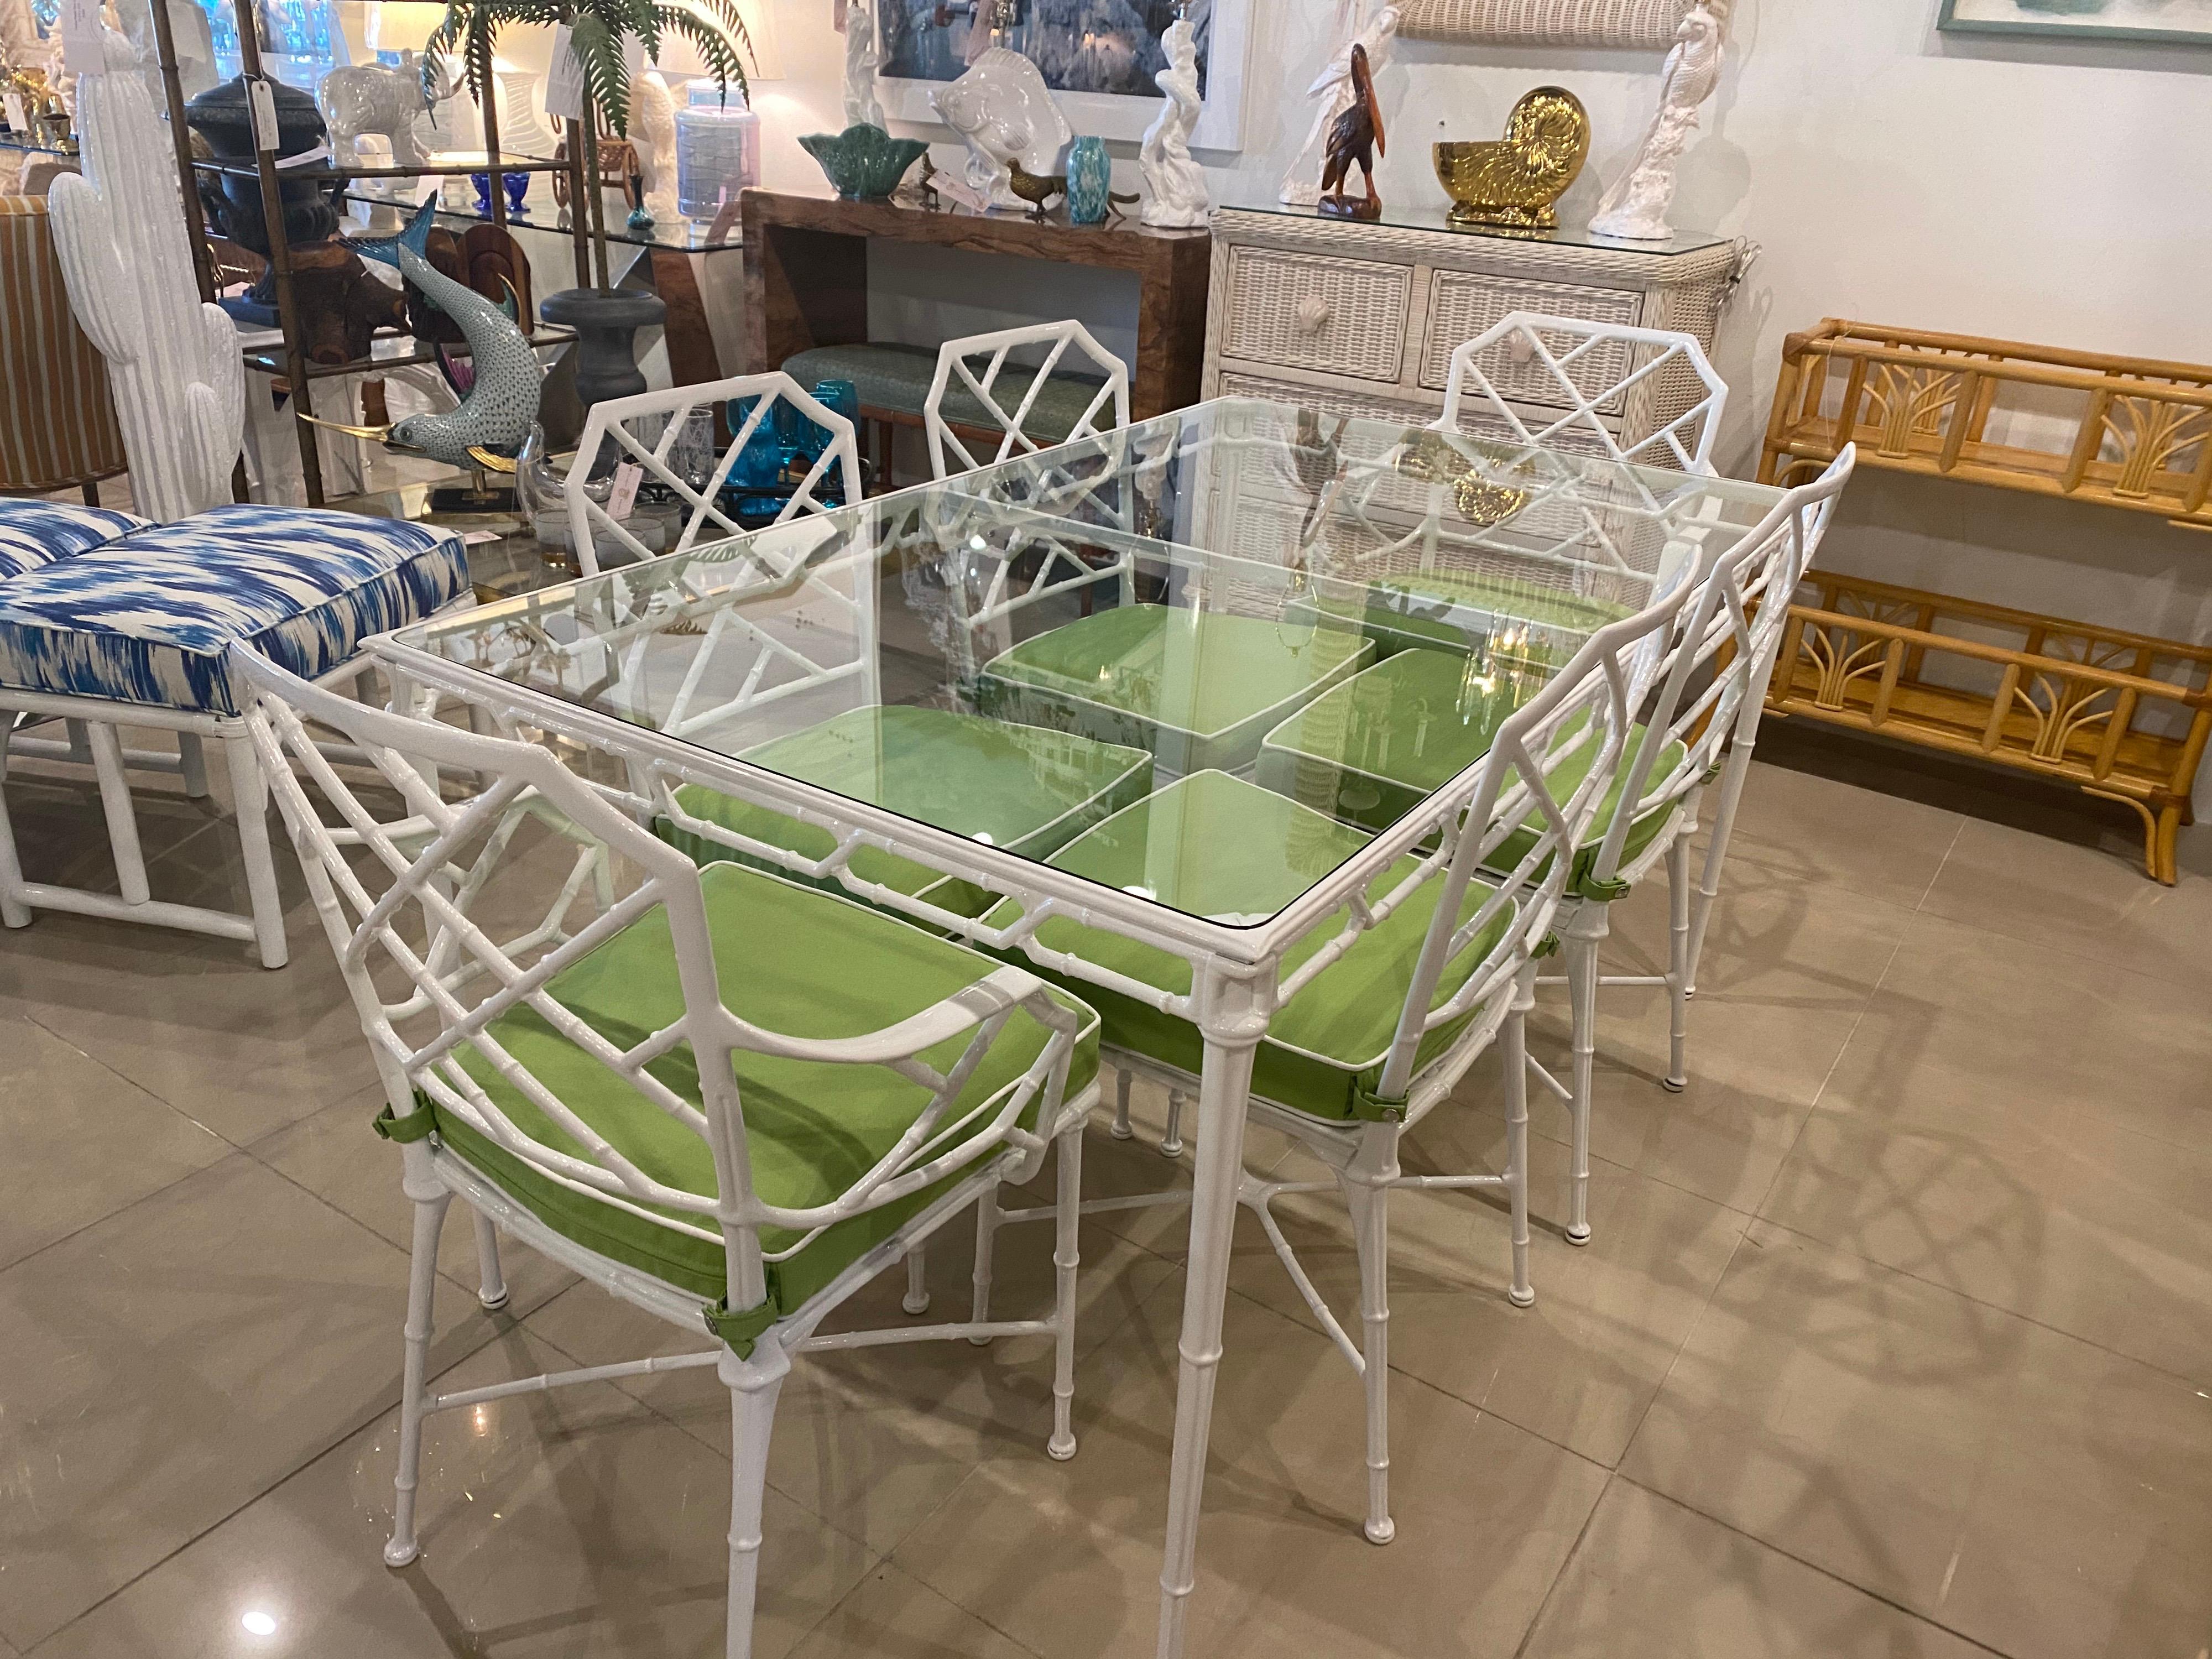 This lovely 7 piece brown Jordan Calcutta dining set has been professionally restored from top to bottom! This has been newly powder-coated in a fresh white. New custom glass top has been cut for this table. All new stainless steel snap on cushions